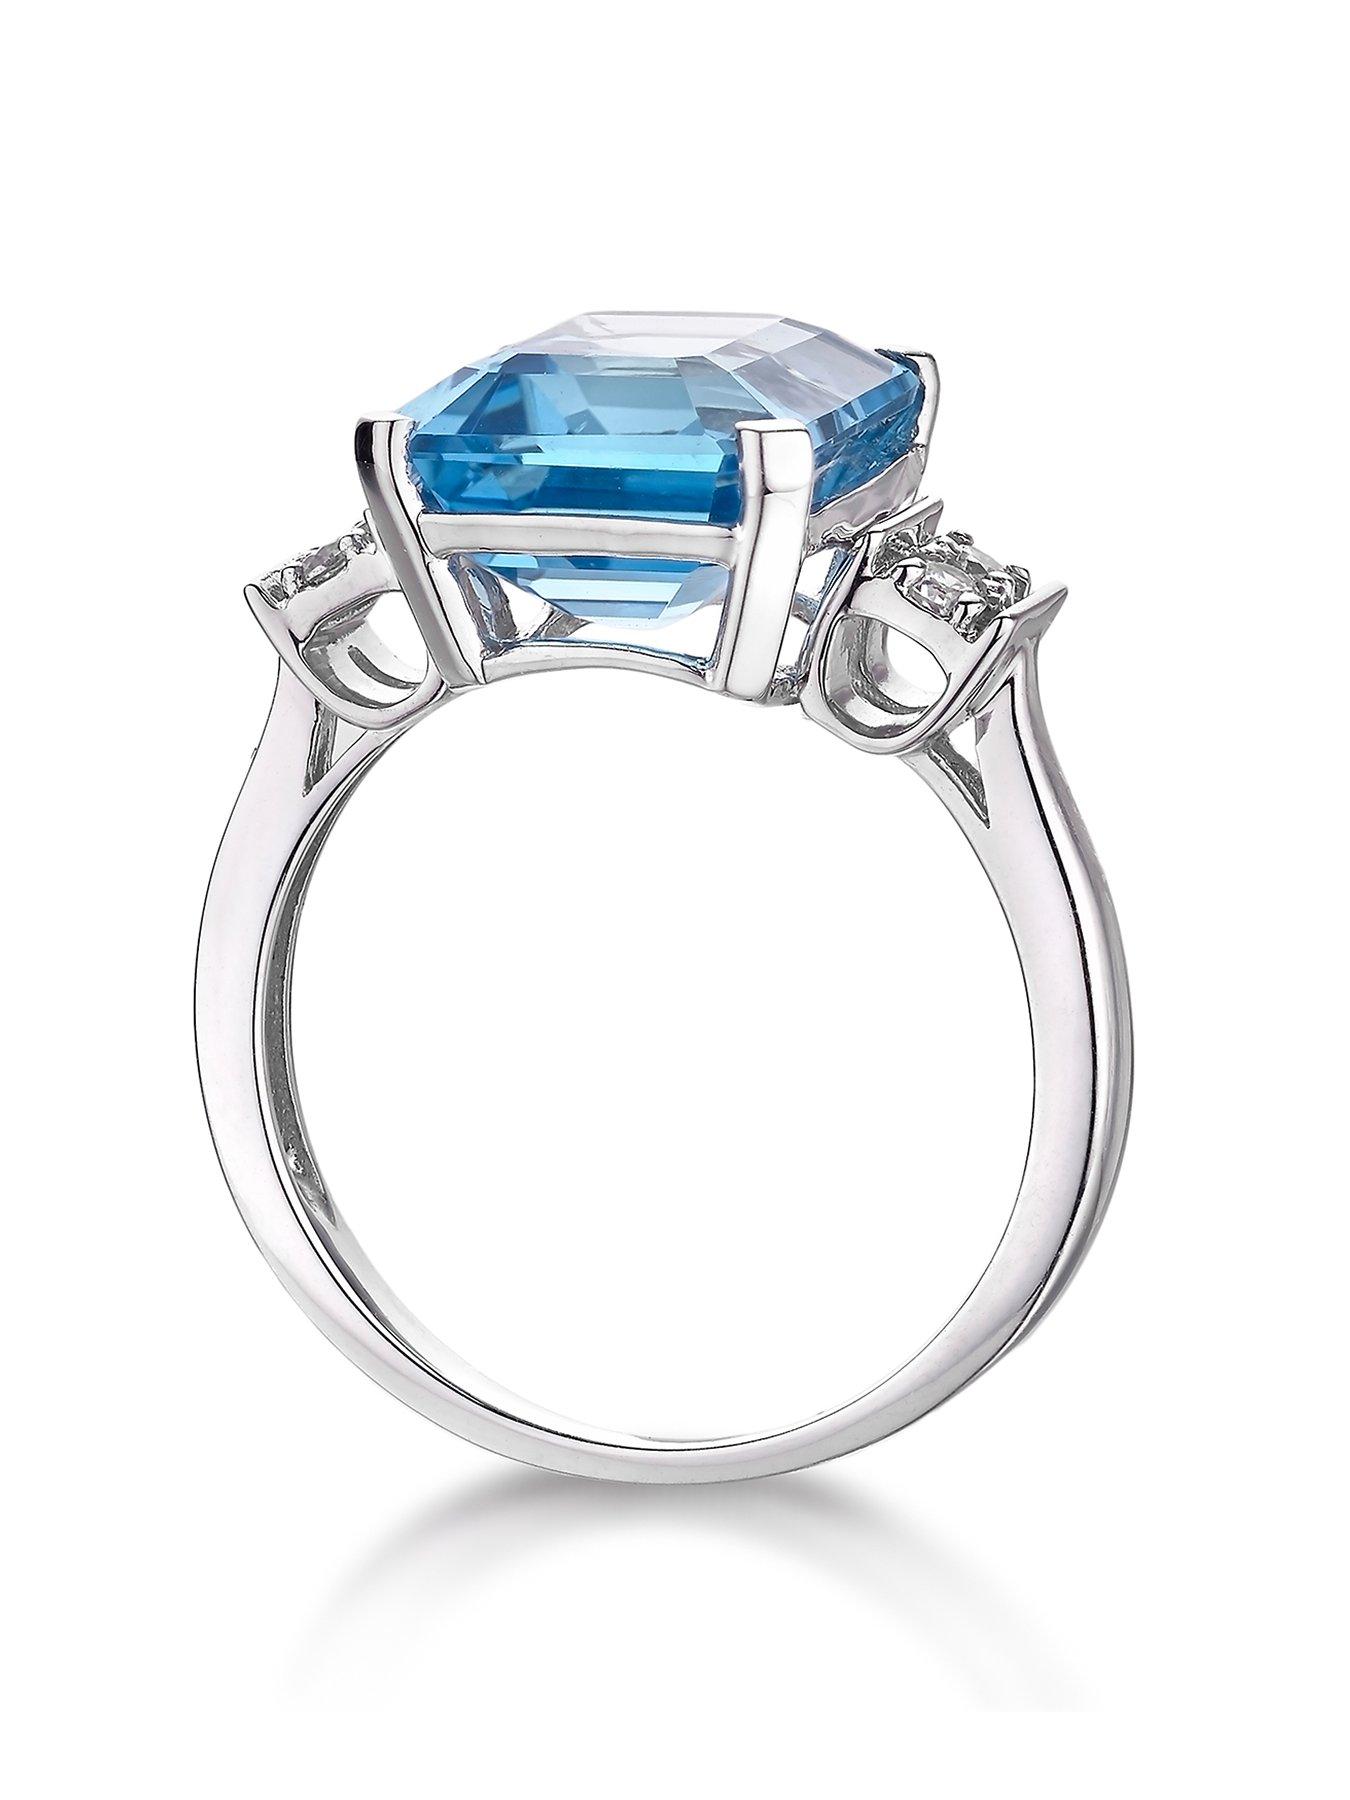 Jewellery & watches 9ct White Gold Blue Topaz Emerald Cut Ring